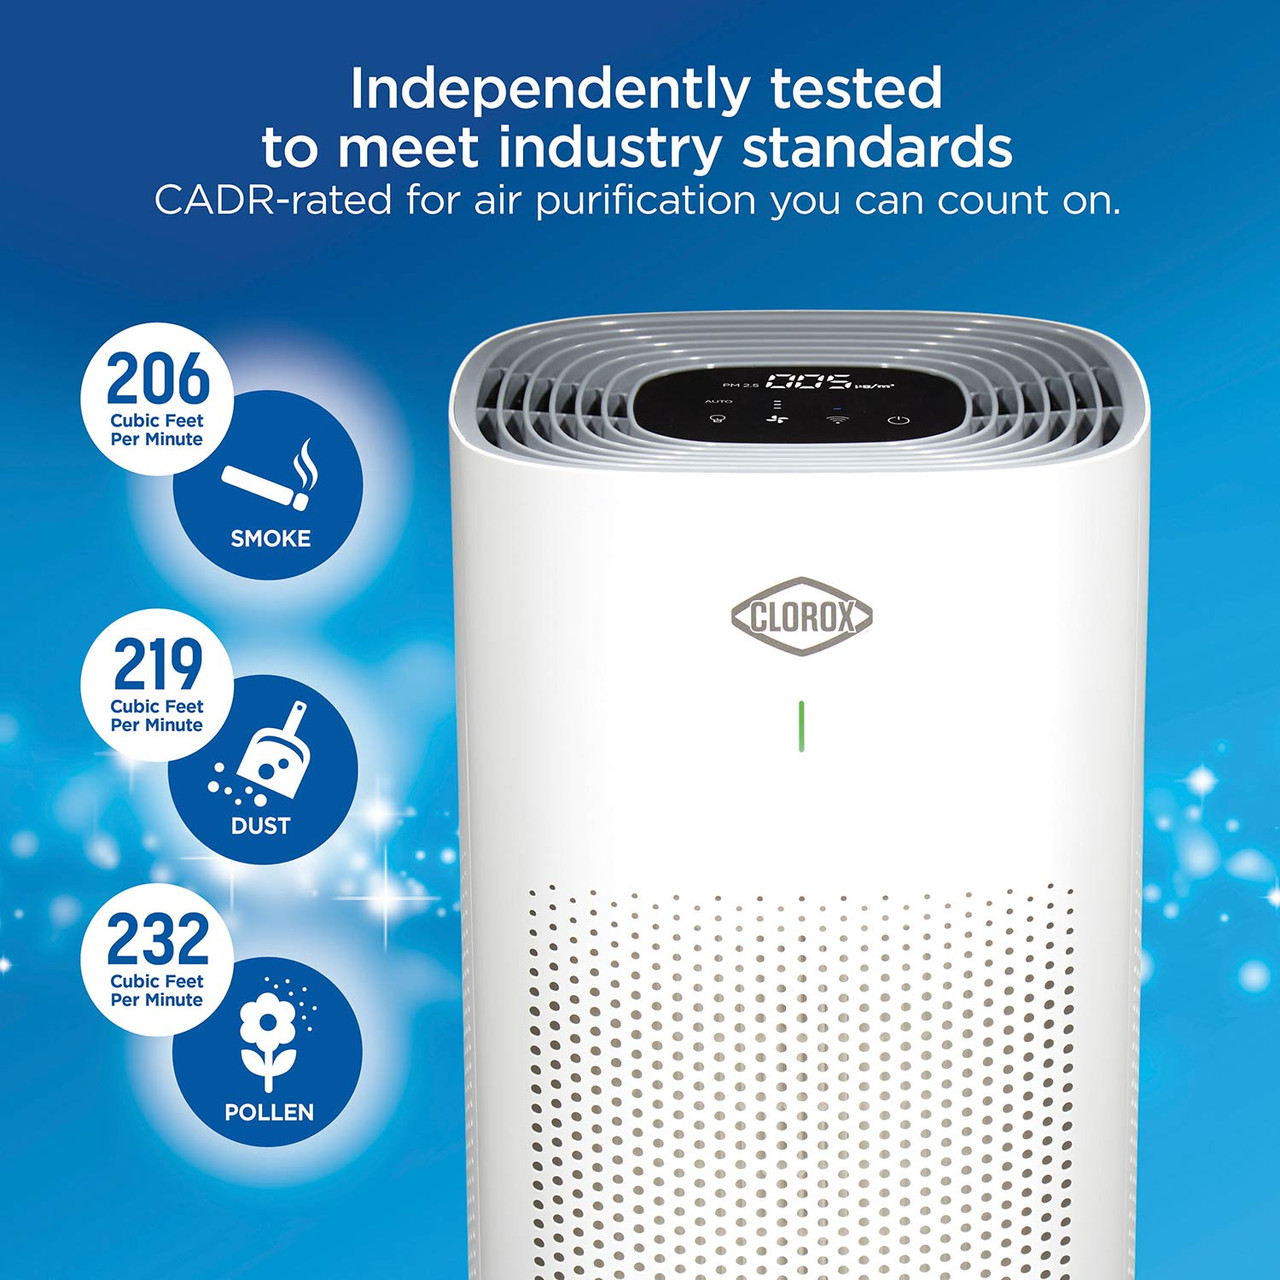 Independently tested for proven performance, CADR-rated and Energy Star certified for air purification you can count on